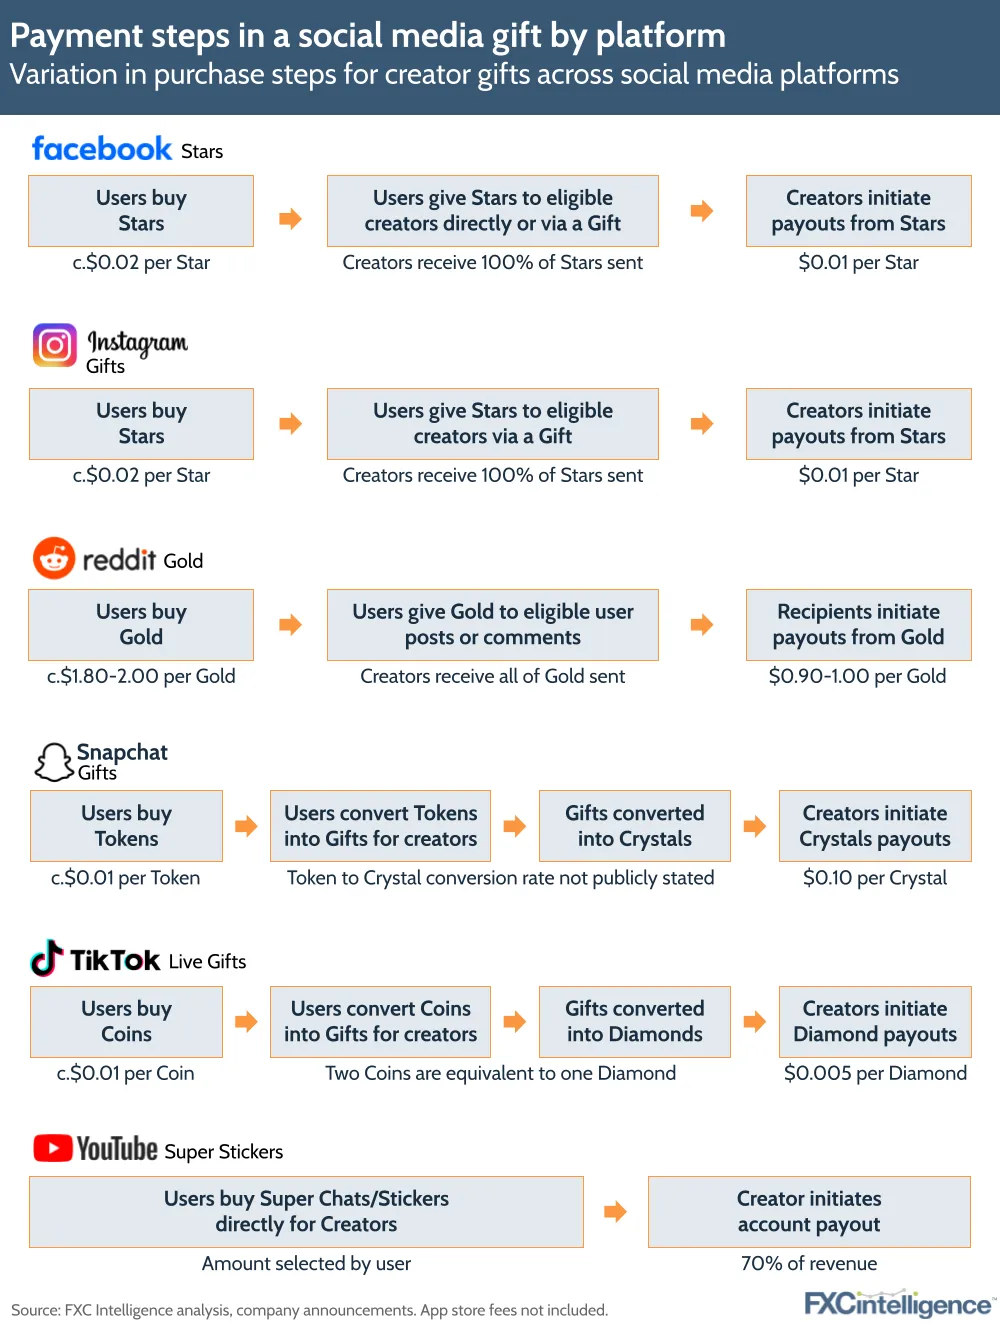 Payment steps in a social media gift by platform
Variation in purchase steps for creator gifts across social media platforms